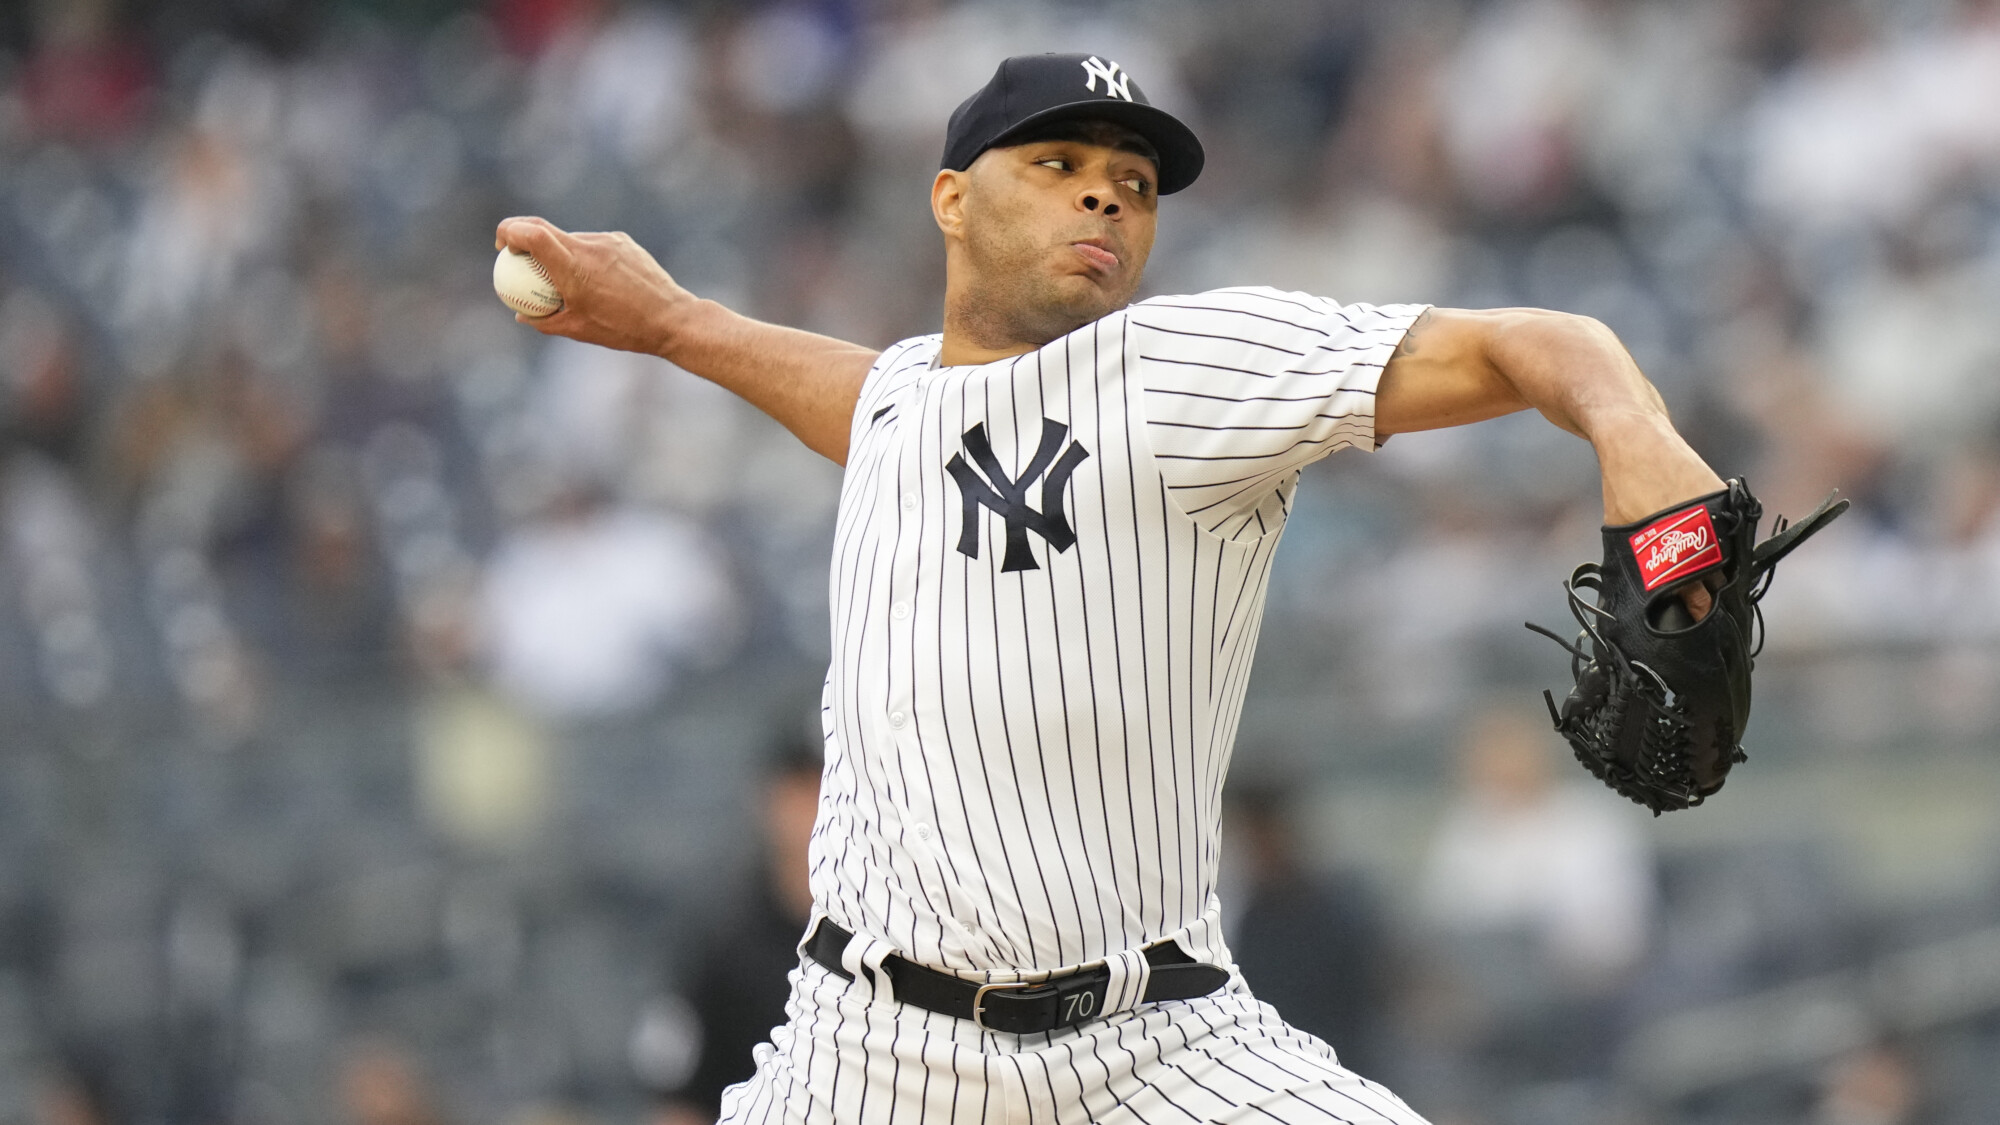 MLB roundup: Yankees pitcher Cordero suspended for the rest of the